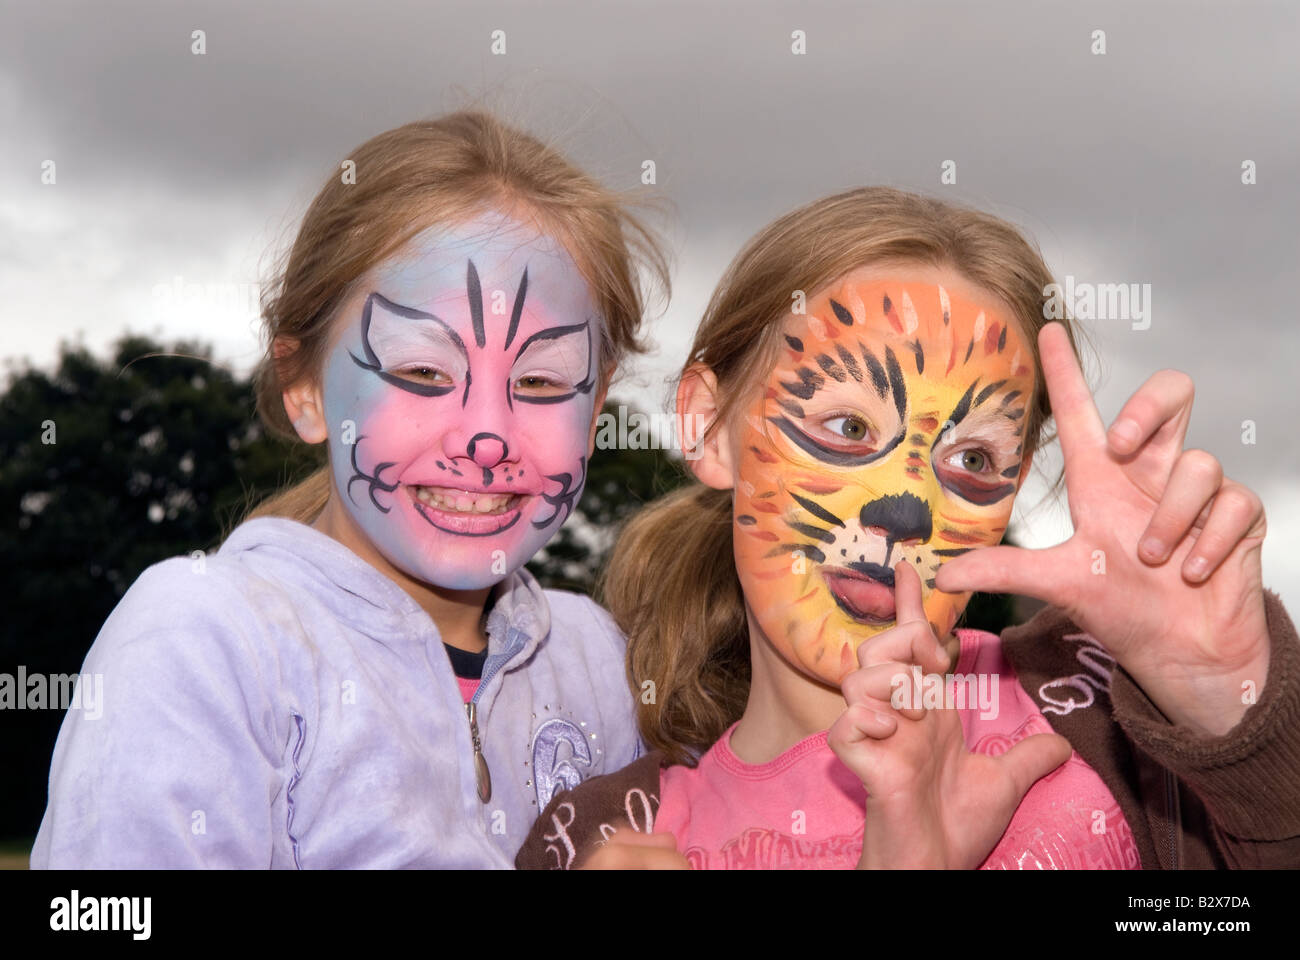 Free Photos - Two Young Children With Their Faces Painted In